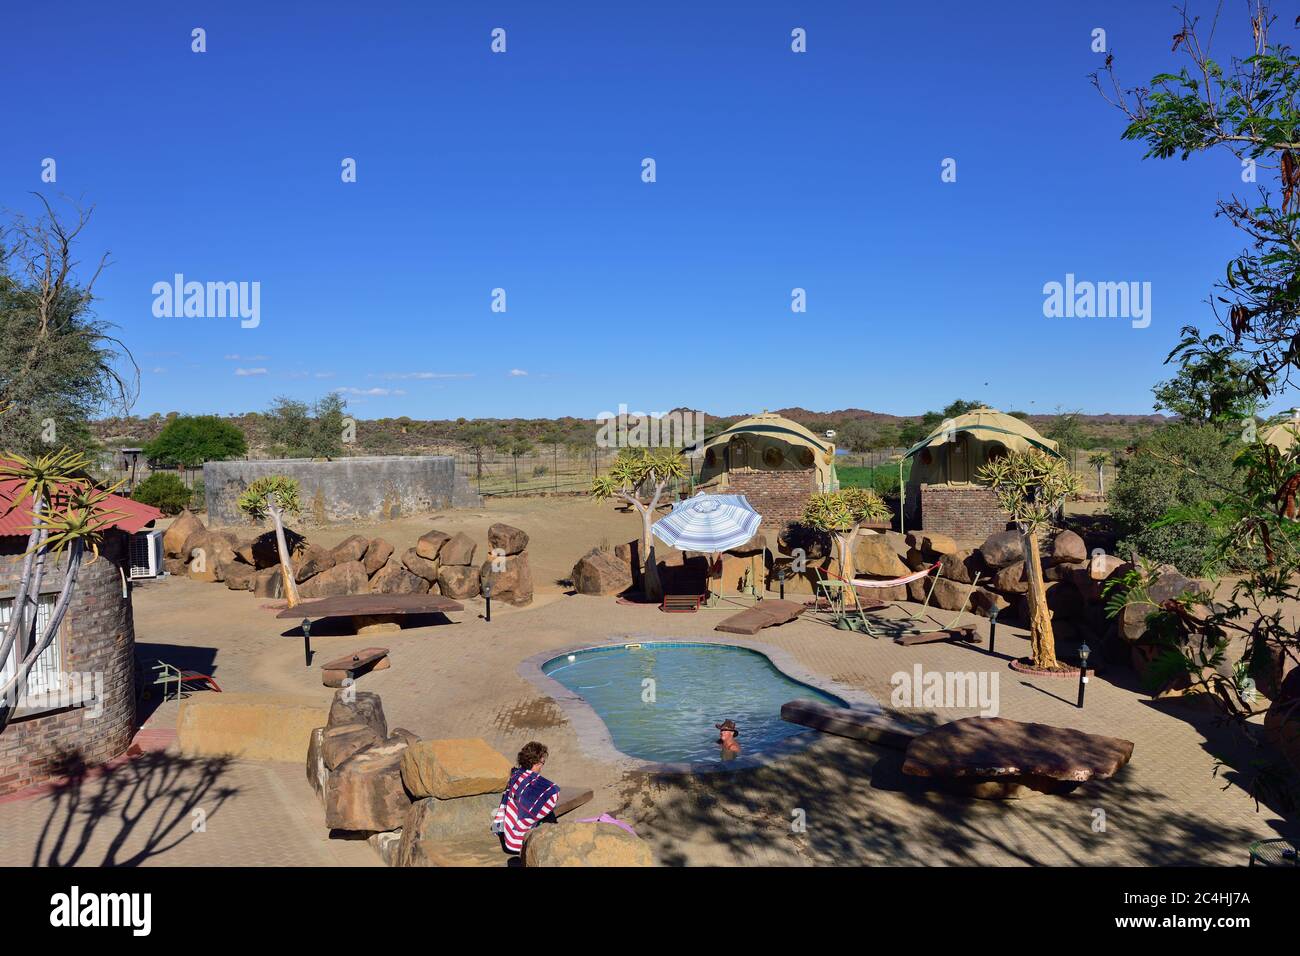 KEETMANSHOOP, NAMIBIA - JAN 25, 2016: Swimming pool in Quivertree Forest Rest Camp,  where visitors can explore the ancient and famous Quivertree Fore Stock Photo